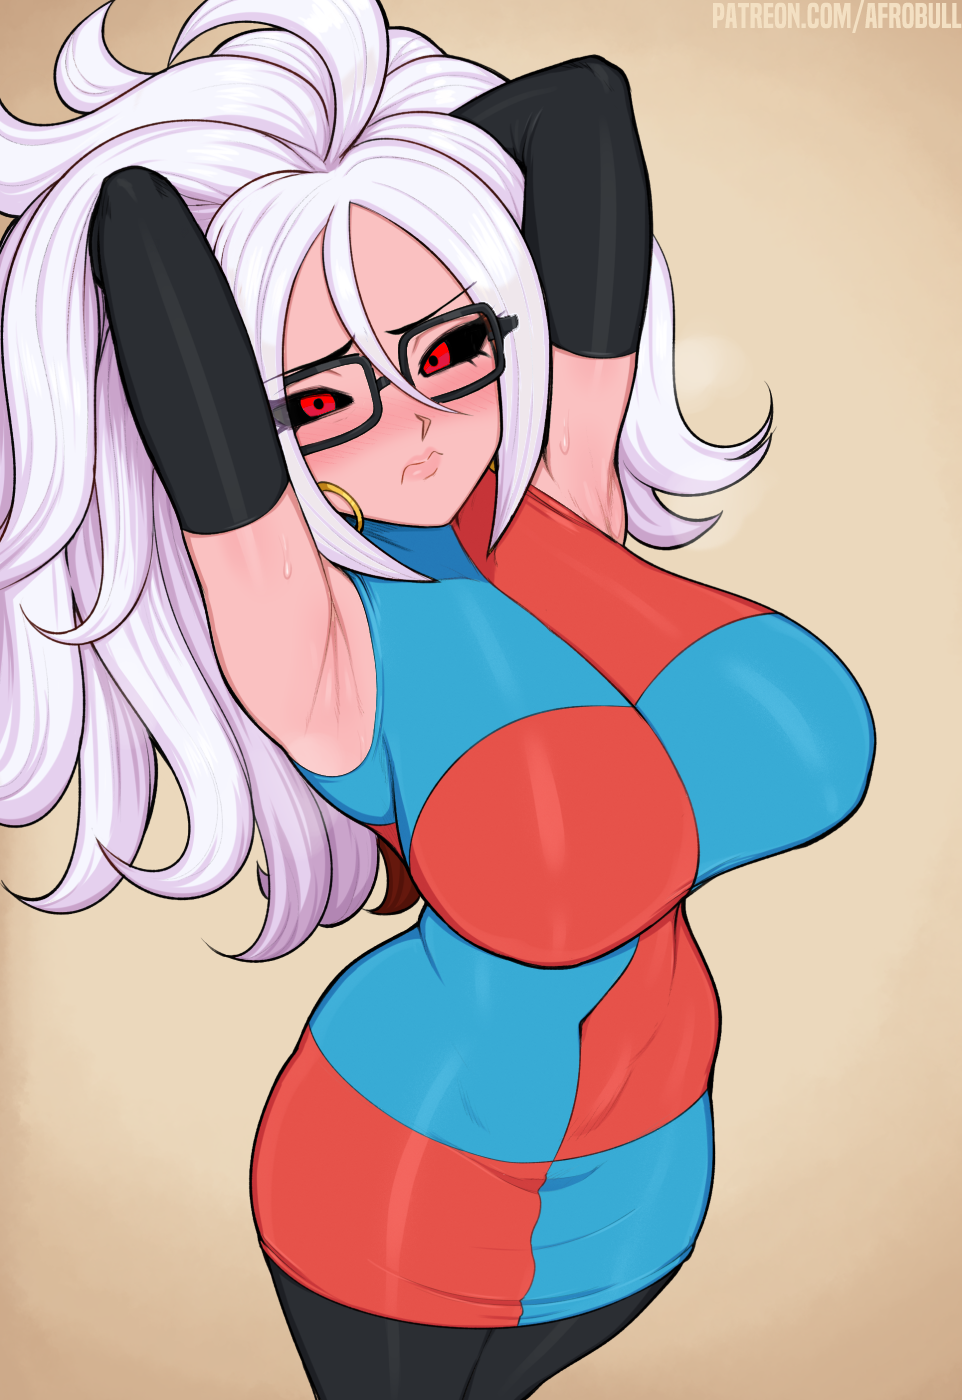 Afrobull android 21